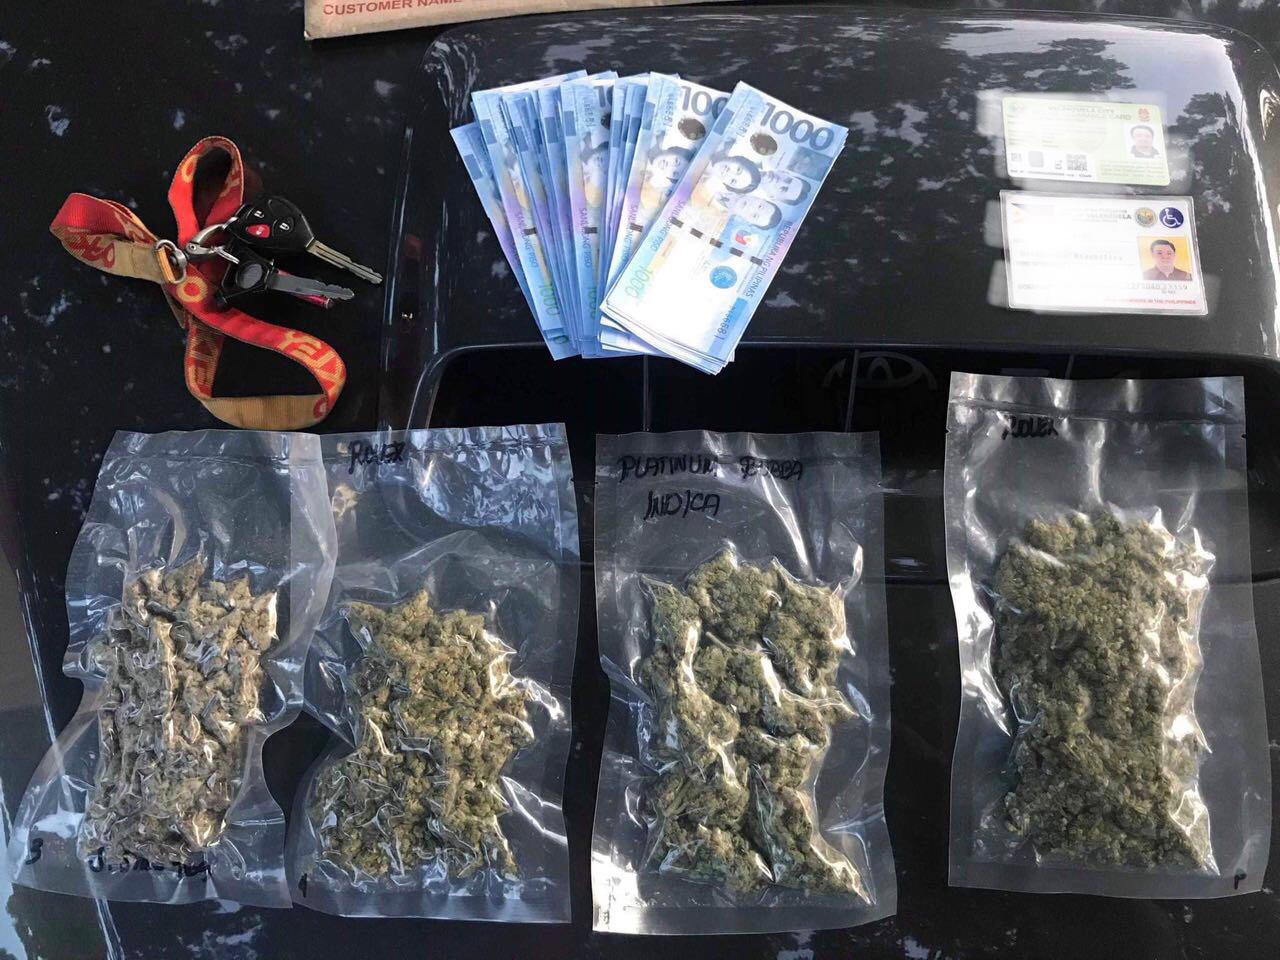 QC cops seize P168K Kush in bust, two arrested